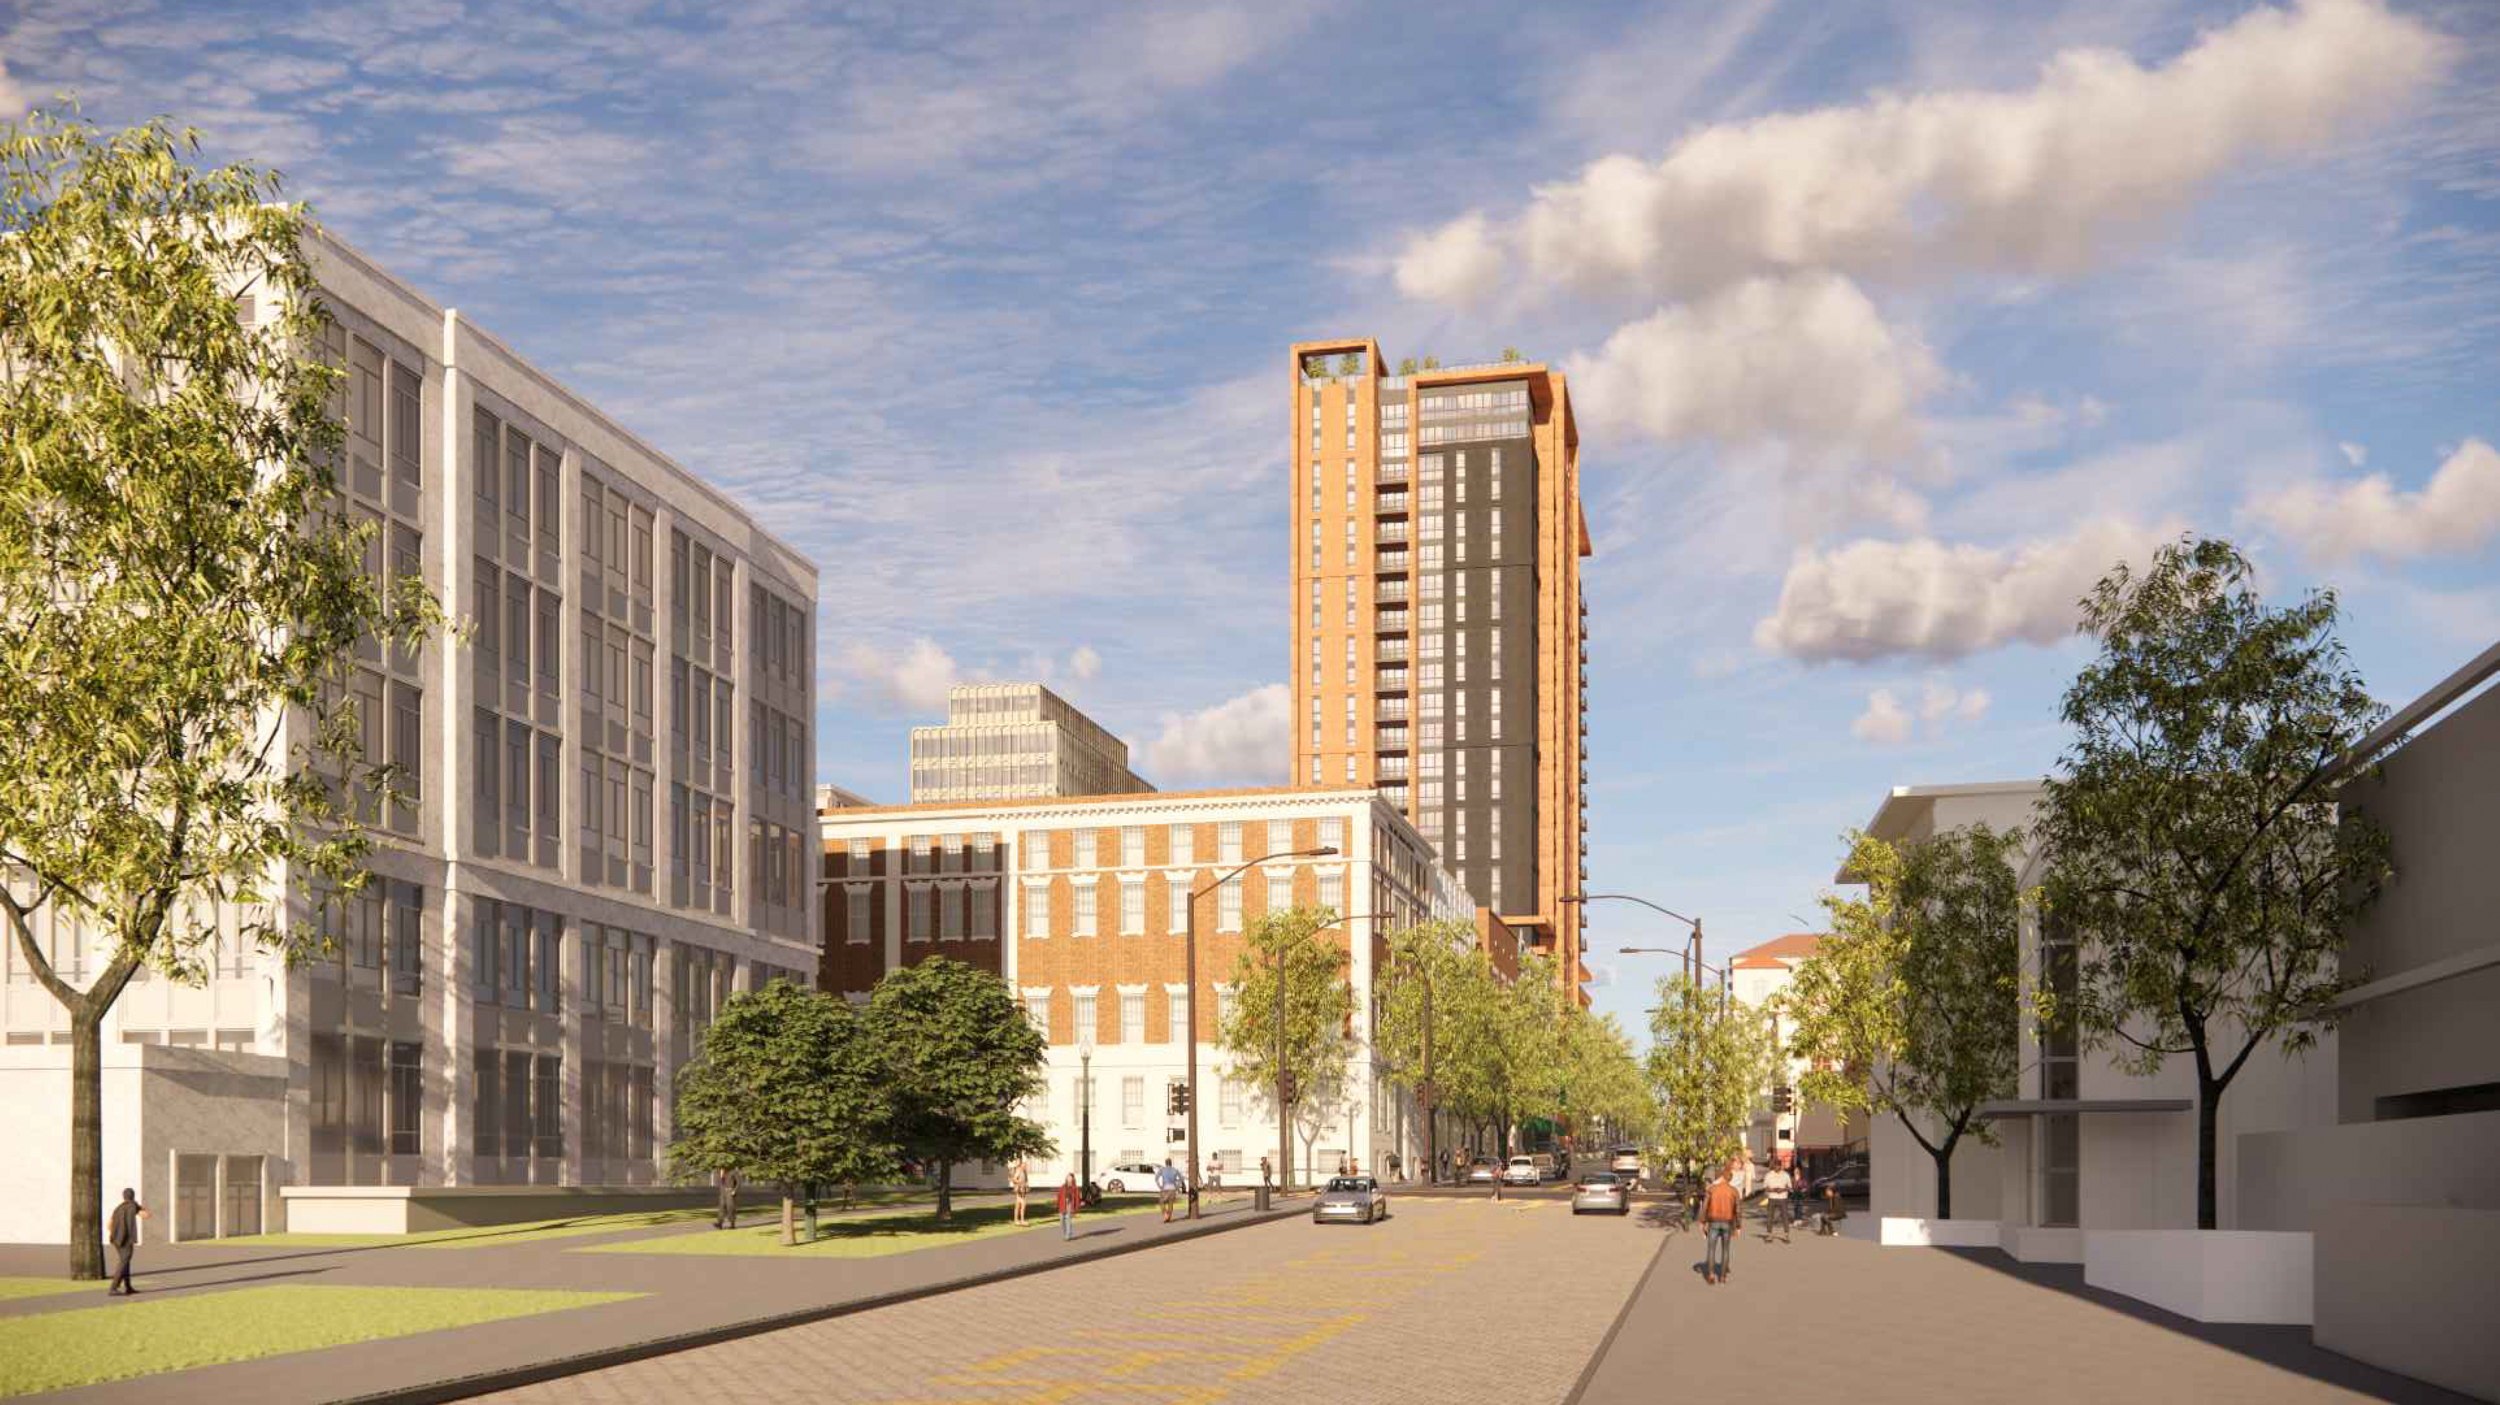 2190 Shattuck Avenue seen from Allston, rendering by Trachtenberg Architects